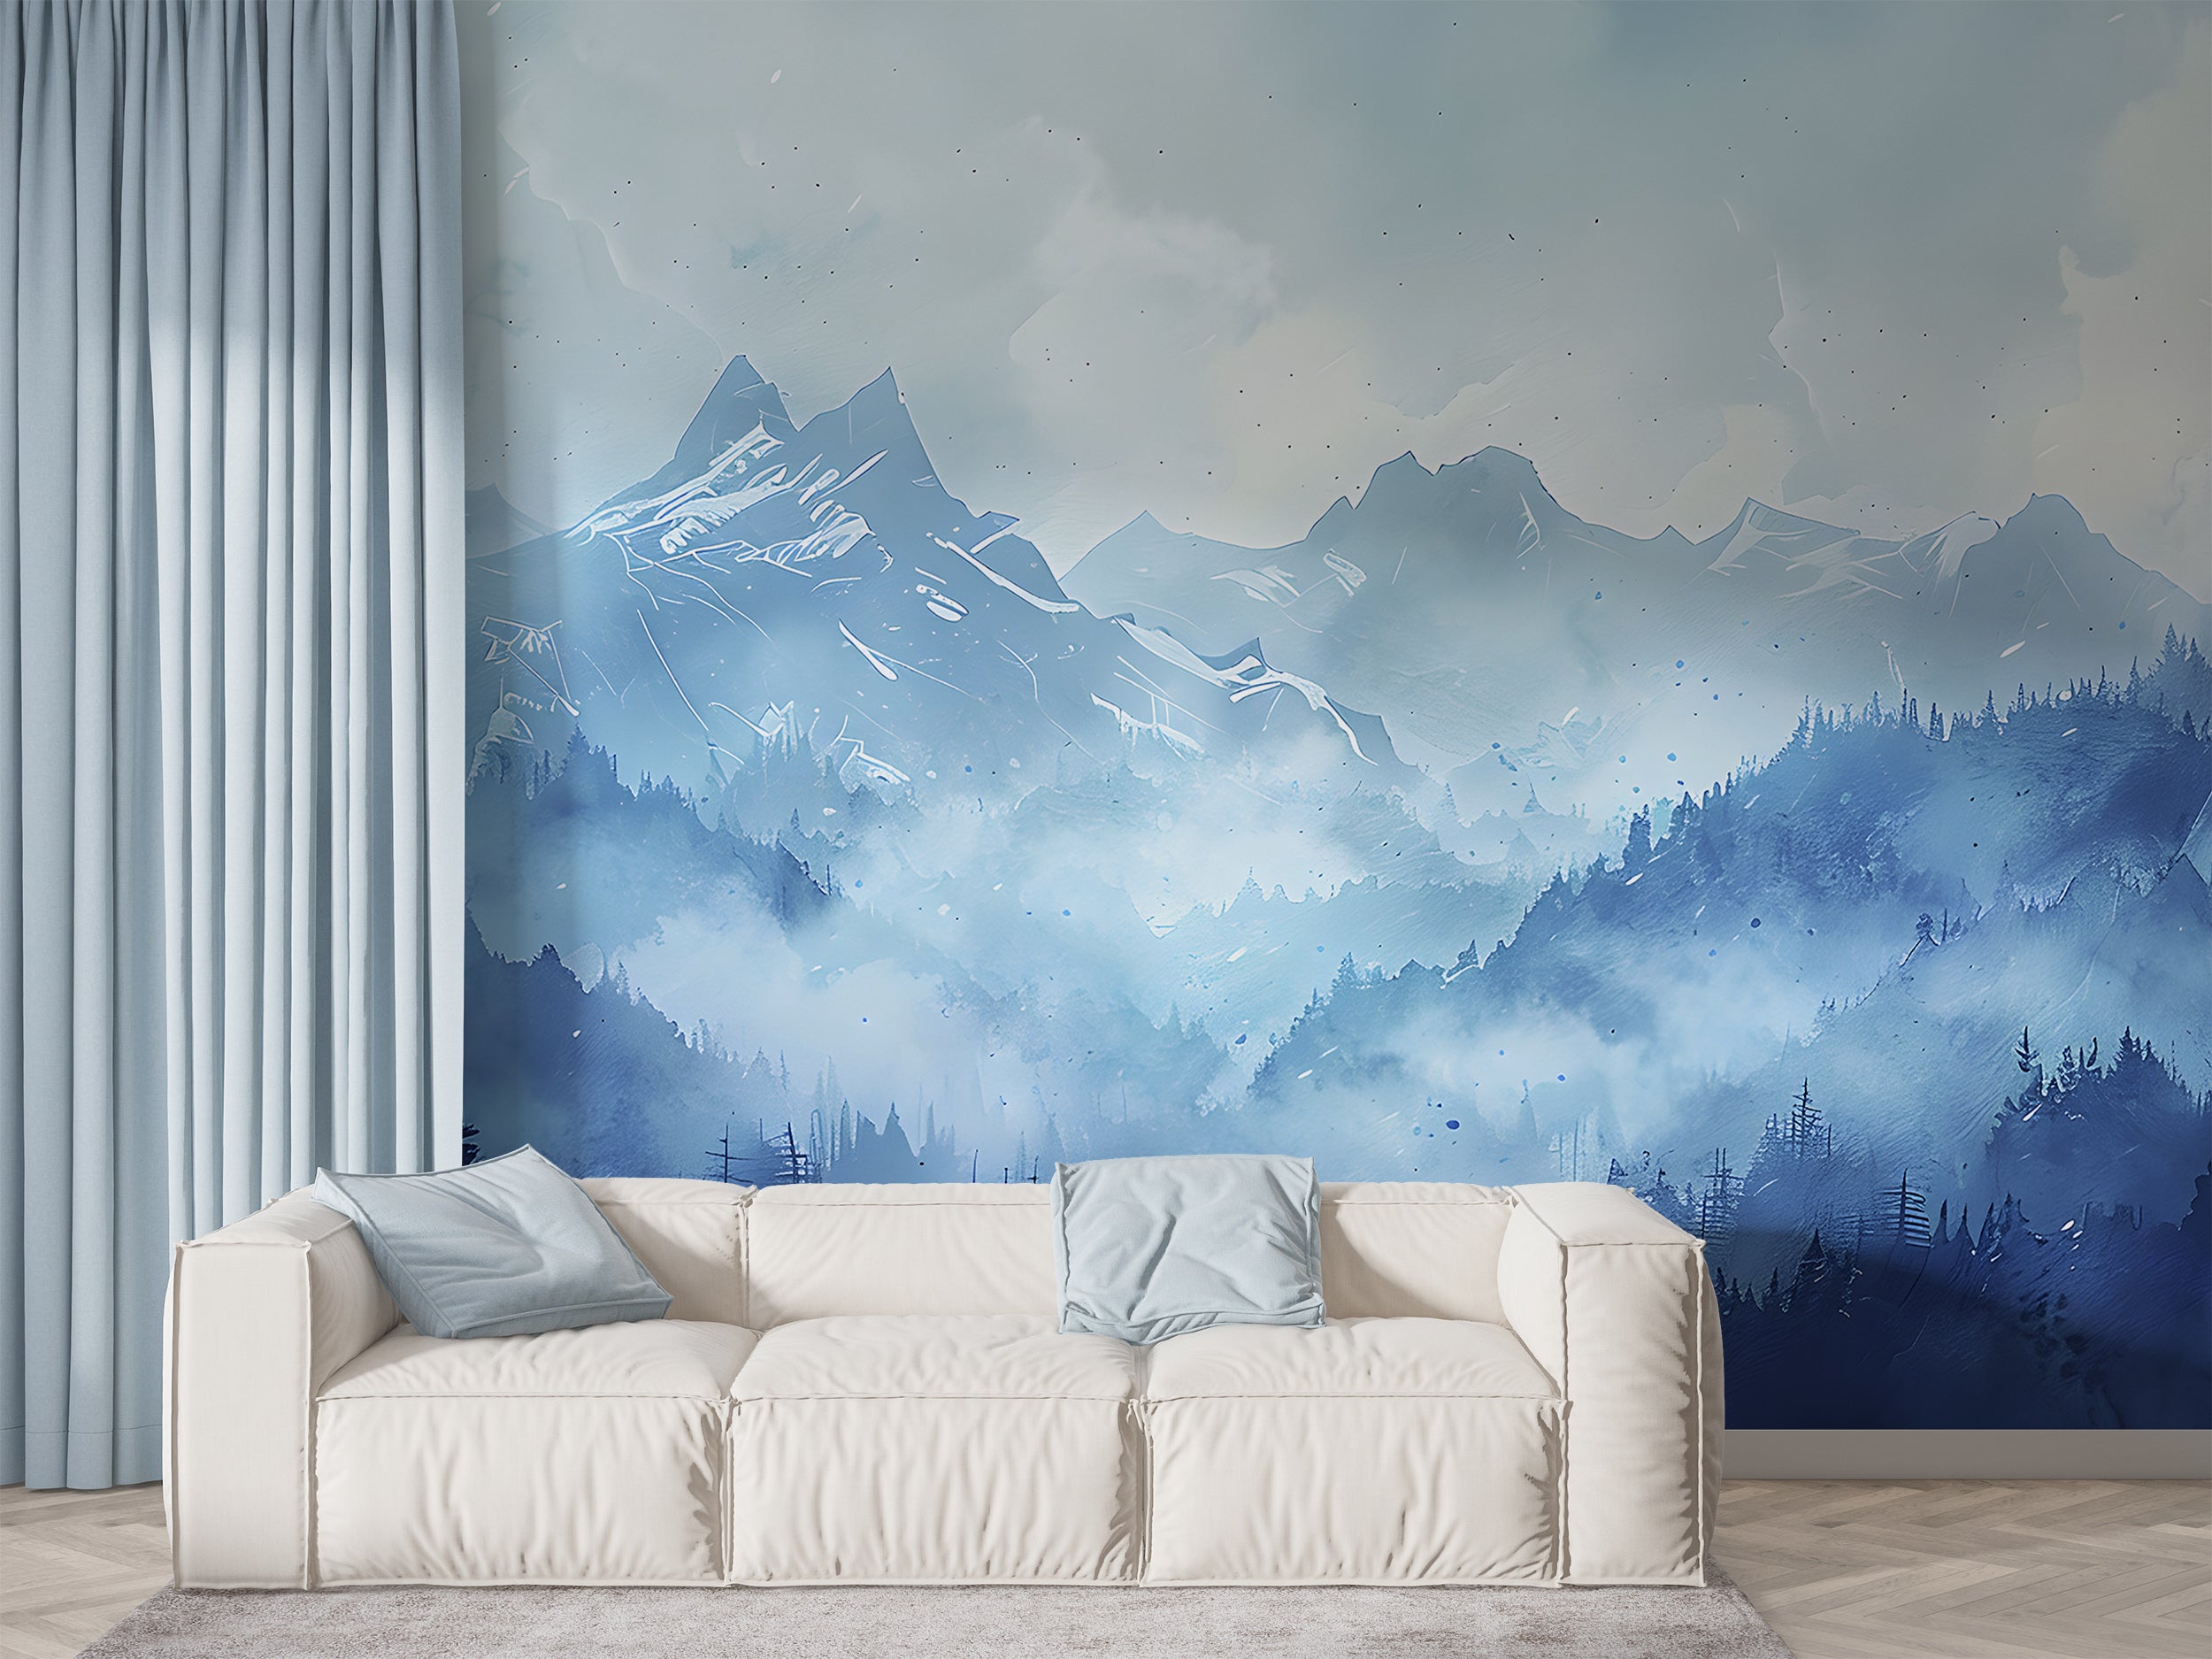 Watercolor Blue Mountains Mural, Self-adhesive Foggy Forest Landscape Wallpaper, Soft Blue Cloudy Mountain Nursery Custom Size Decor